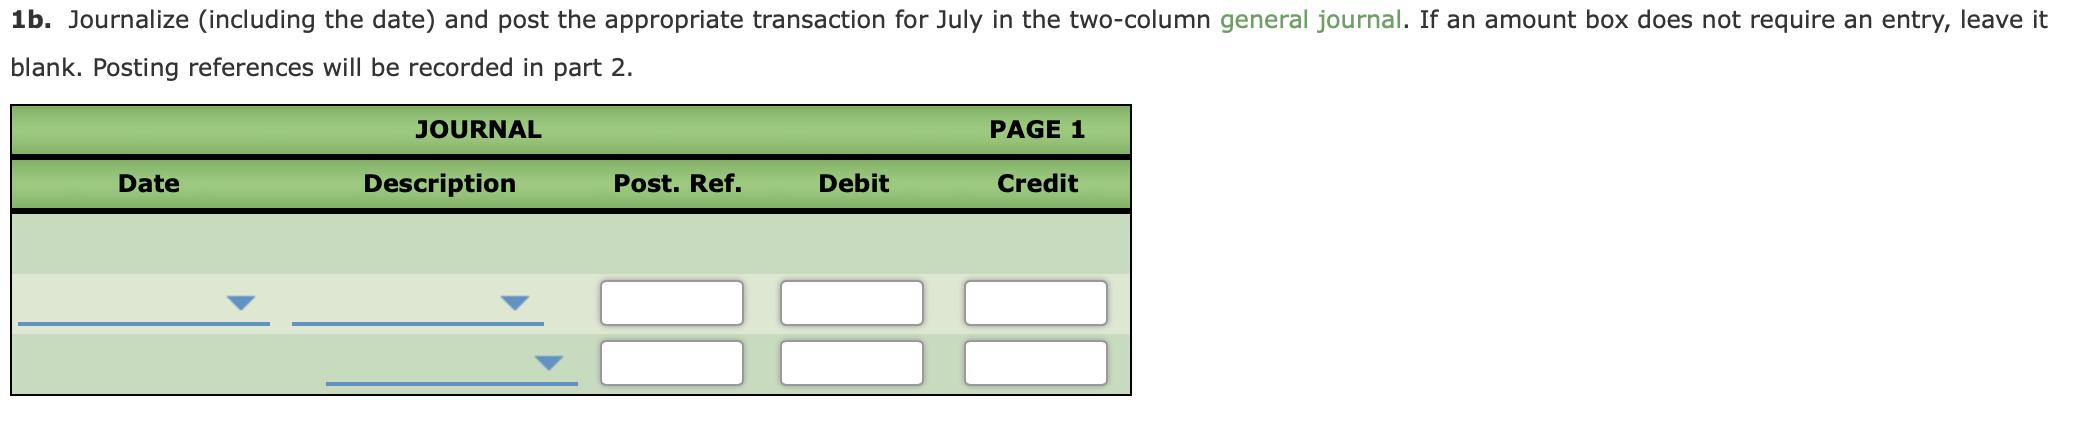 1b. Journalize (including the date) and post the appropriate transaction for July in the two-column general journal. If an am